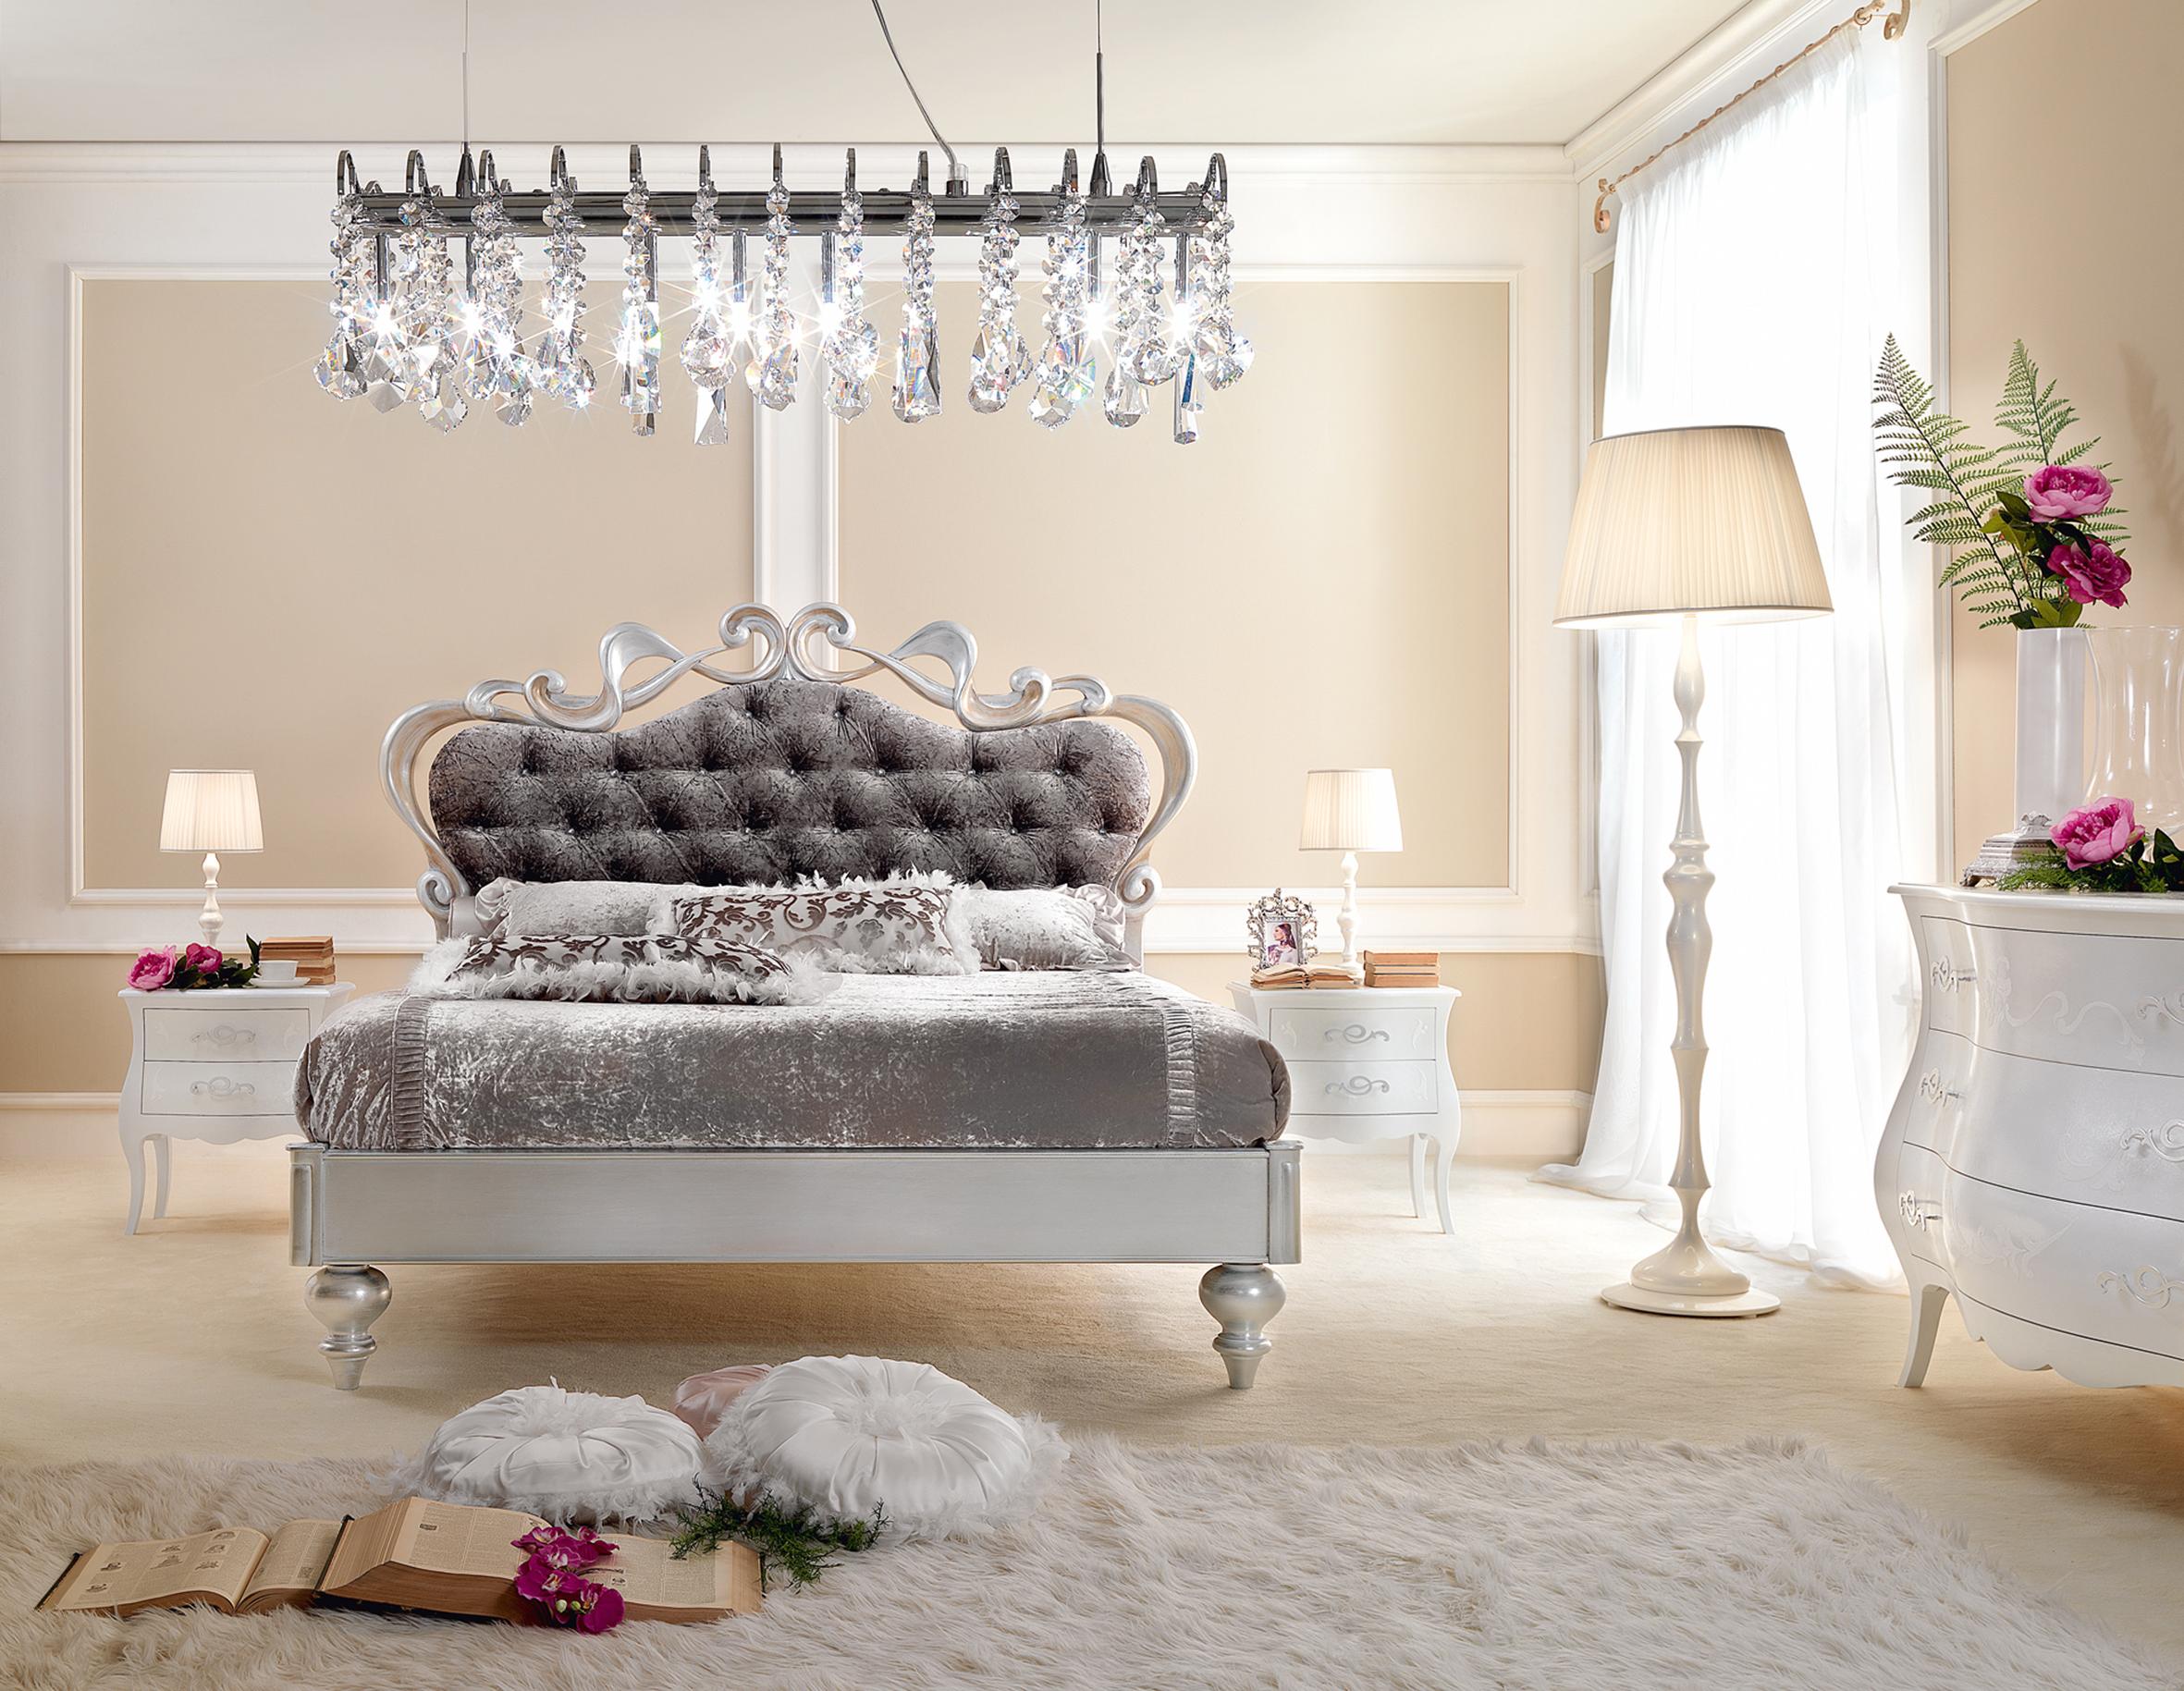 23 Decorating Tricks For Your Bedroom Chandeliers